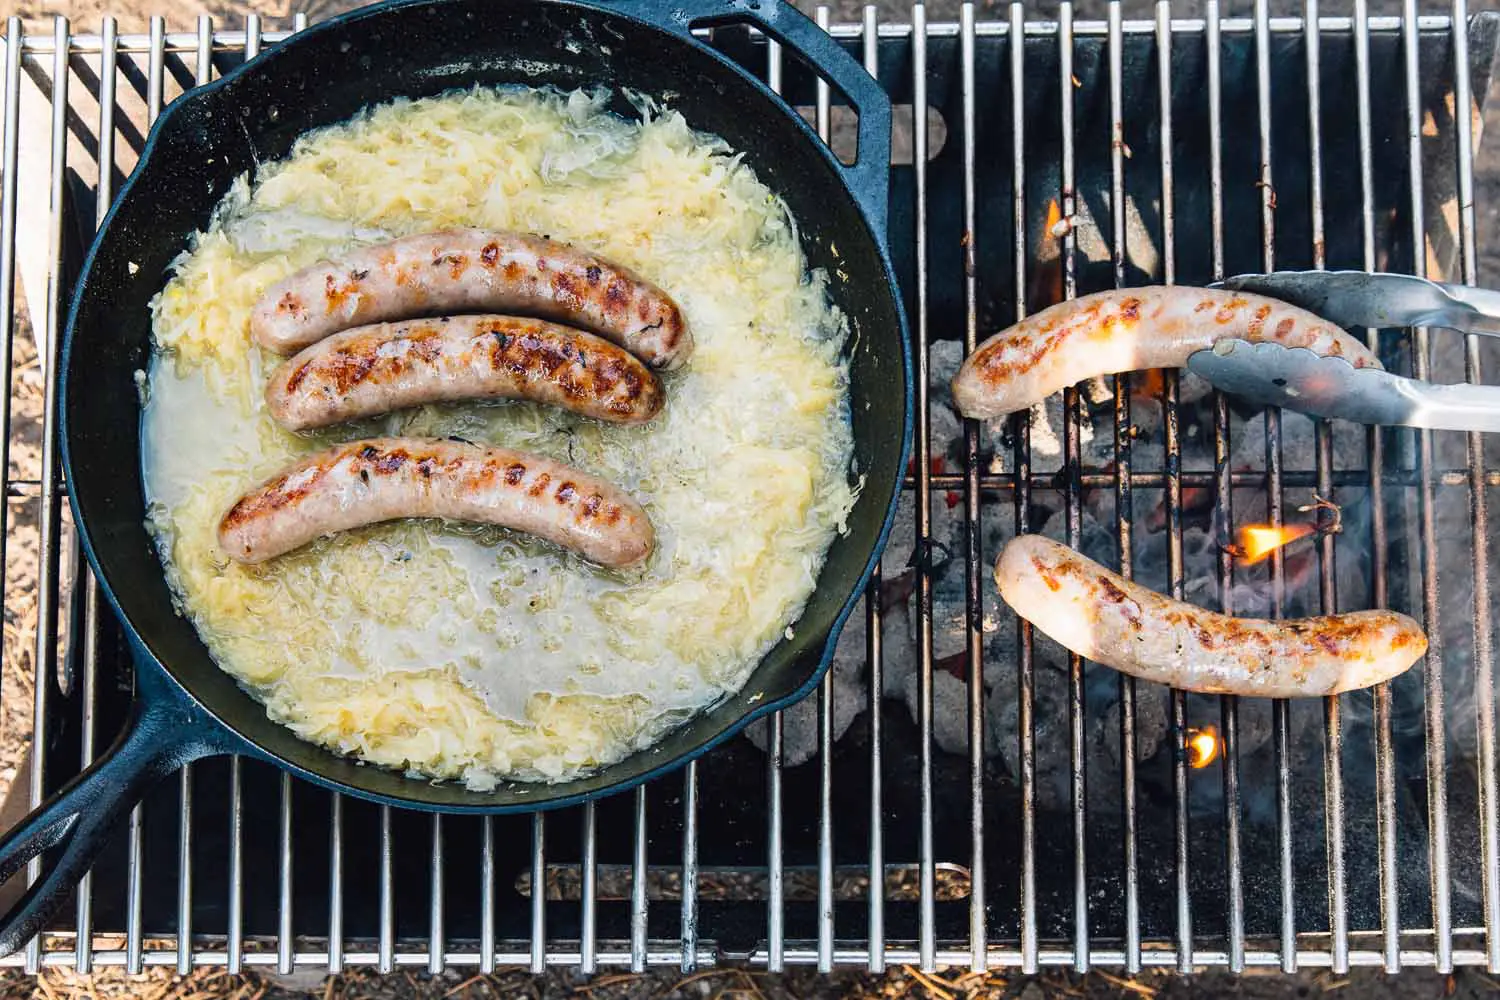 Camping Meal: Campfire Brats with the Fixings Recipe